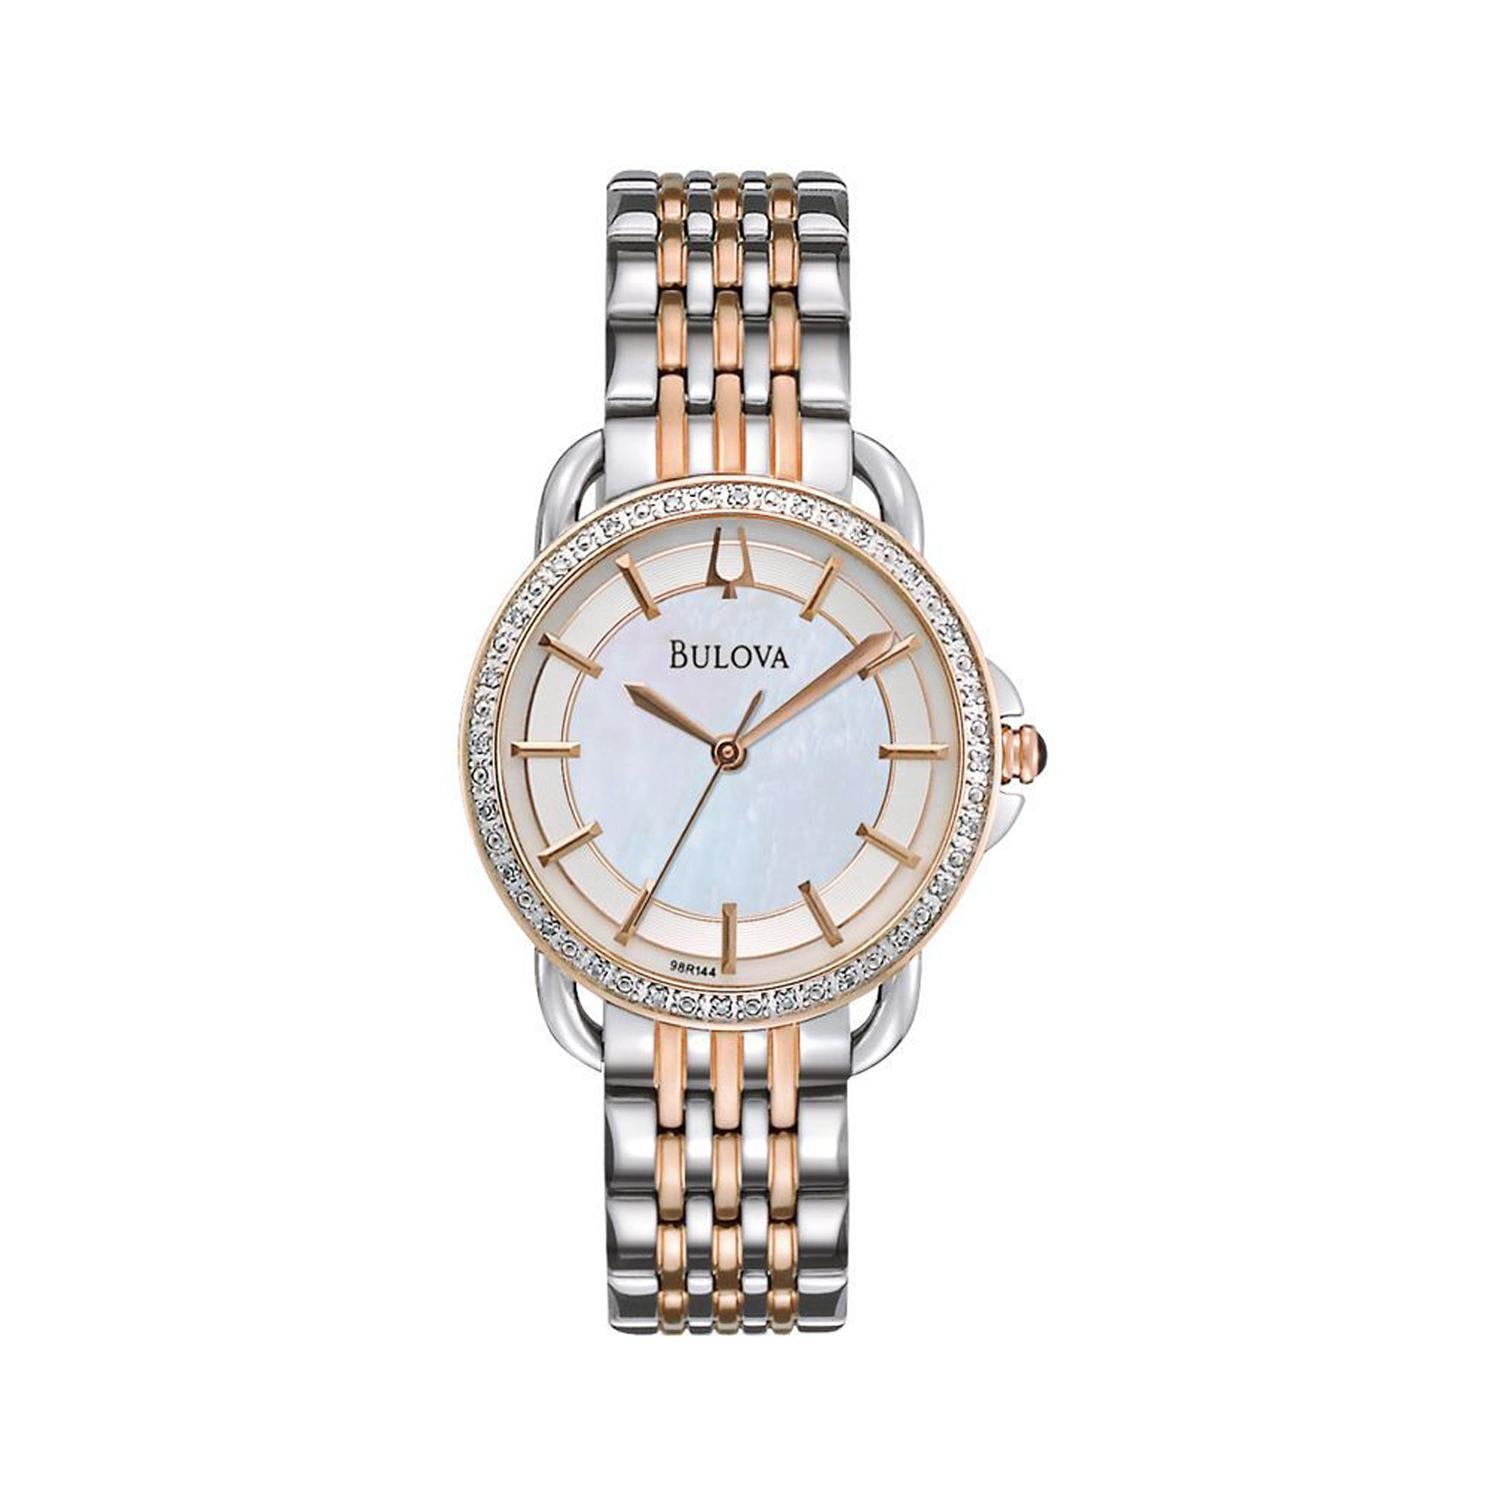 This new Bulova  is a beautiful ladies  timepiece that is powered by quartz movement which is cased in a stainless steel case. It has a round shape face, white dial and has hand sticks style markers. It is completed with a stainless steel band that